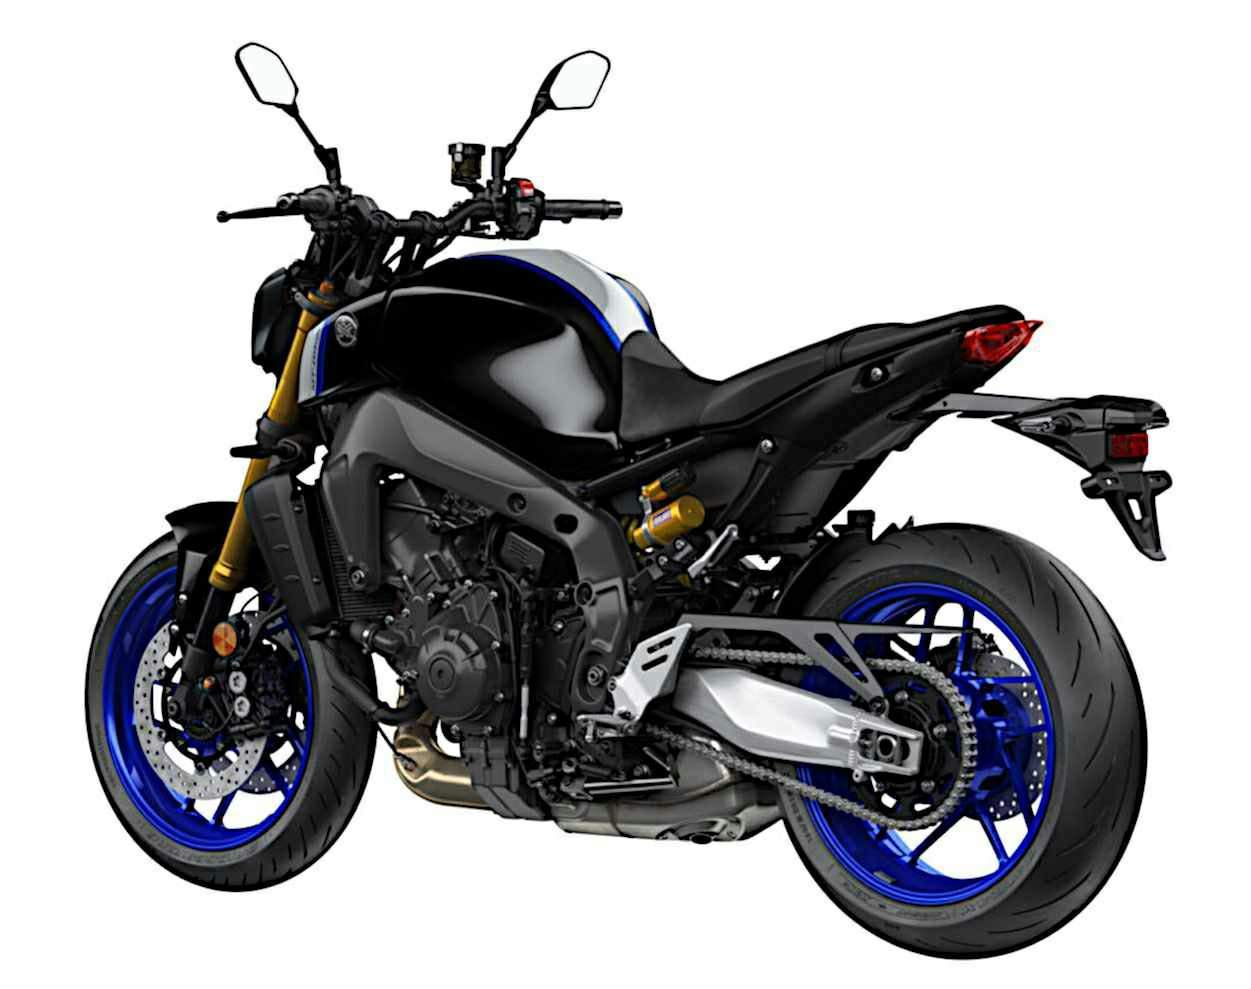 2021 Yamaha MT-10 Hyper Naked Motorcycle - Specs, Prices